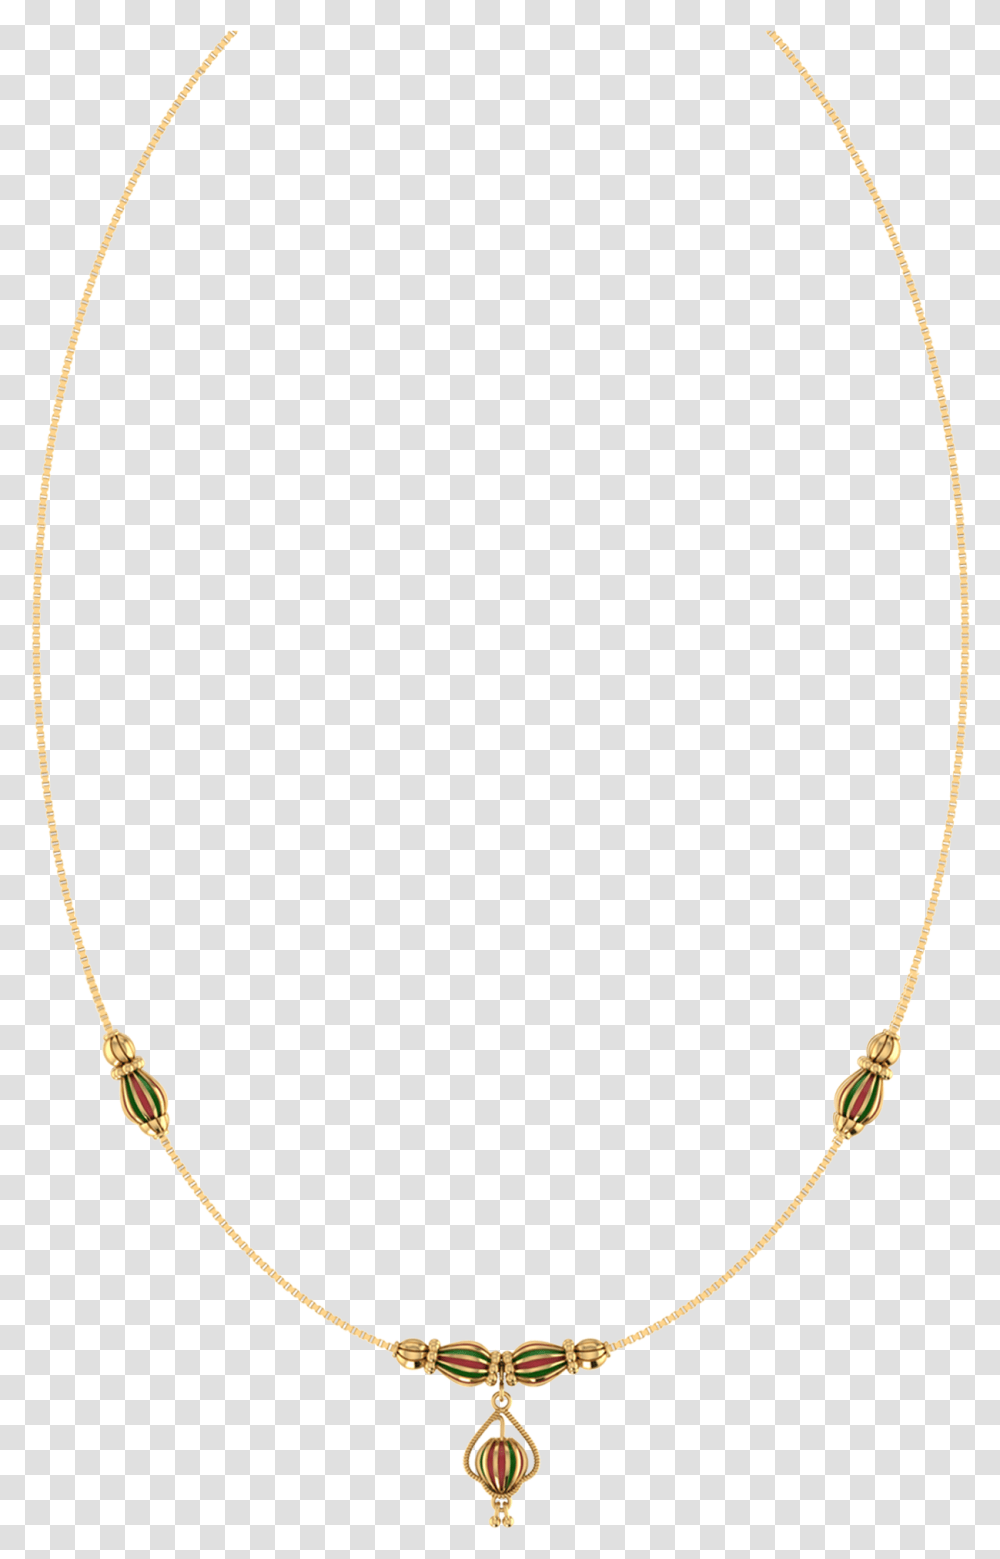 Jewellers Necklace Designs, Jewelry, Accessories, Accessory, Chain Transparent Png